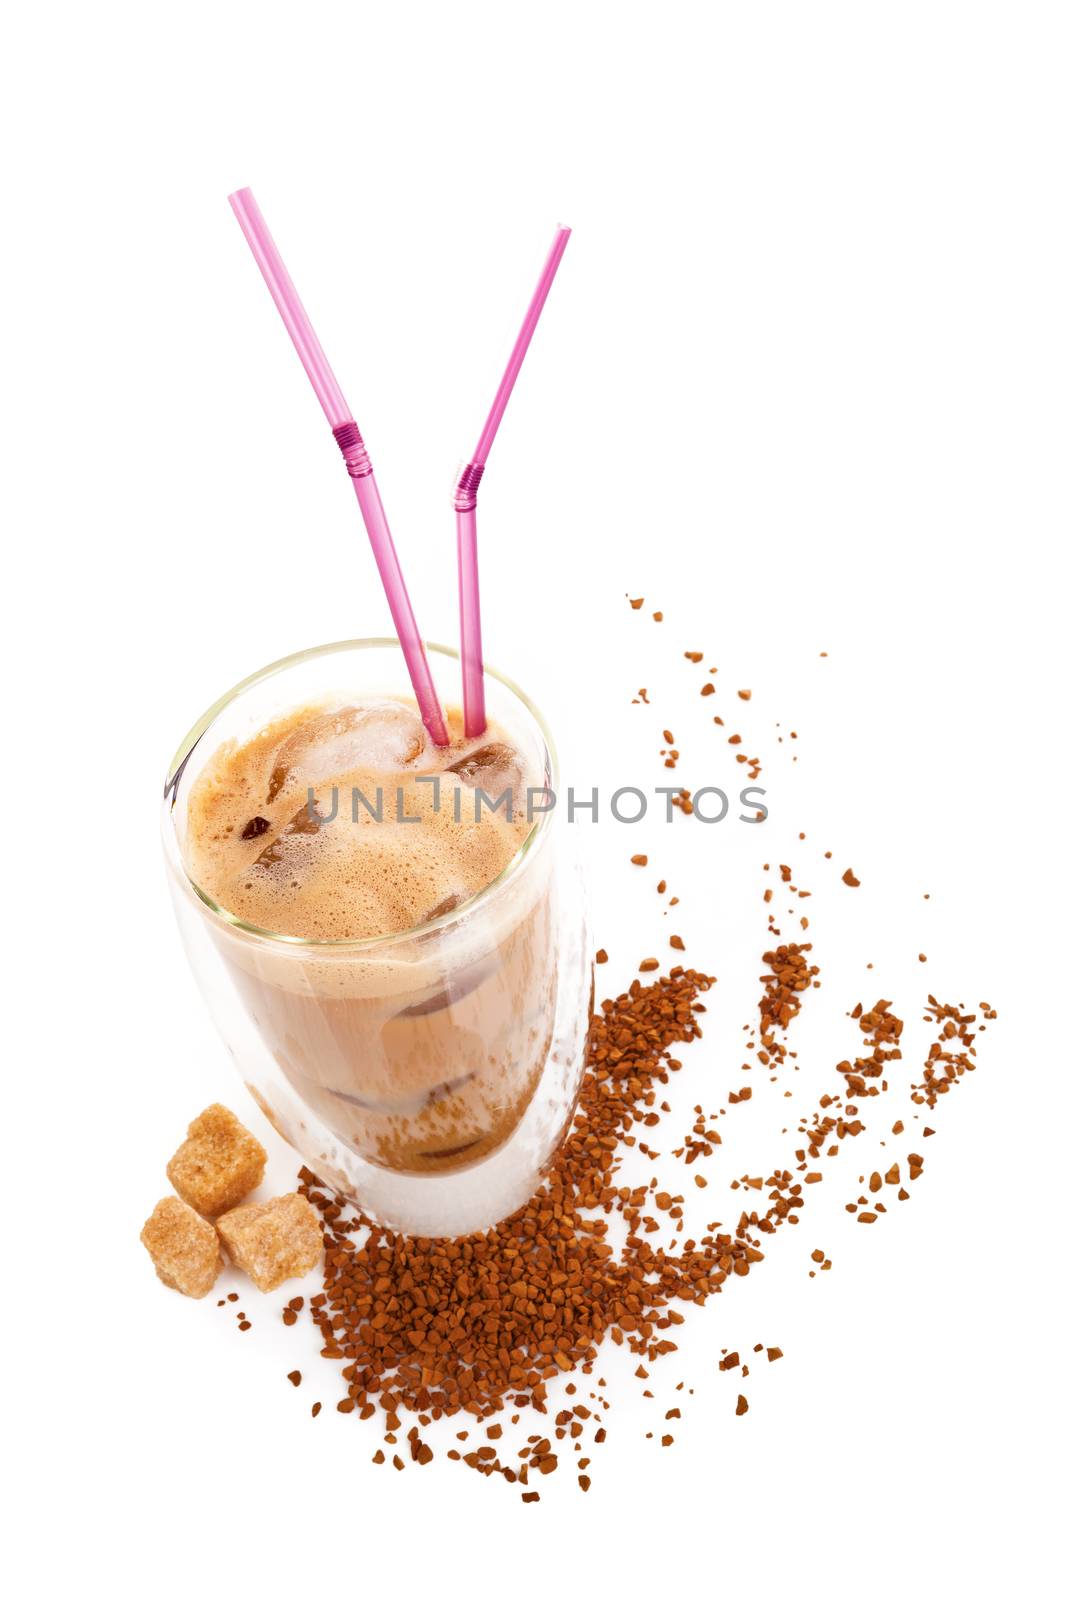 Delicious ice coffee with instant coffee and brown sugar on white background. Traditional coffee drinking.